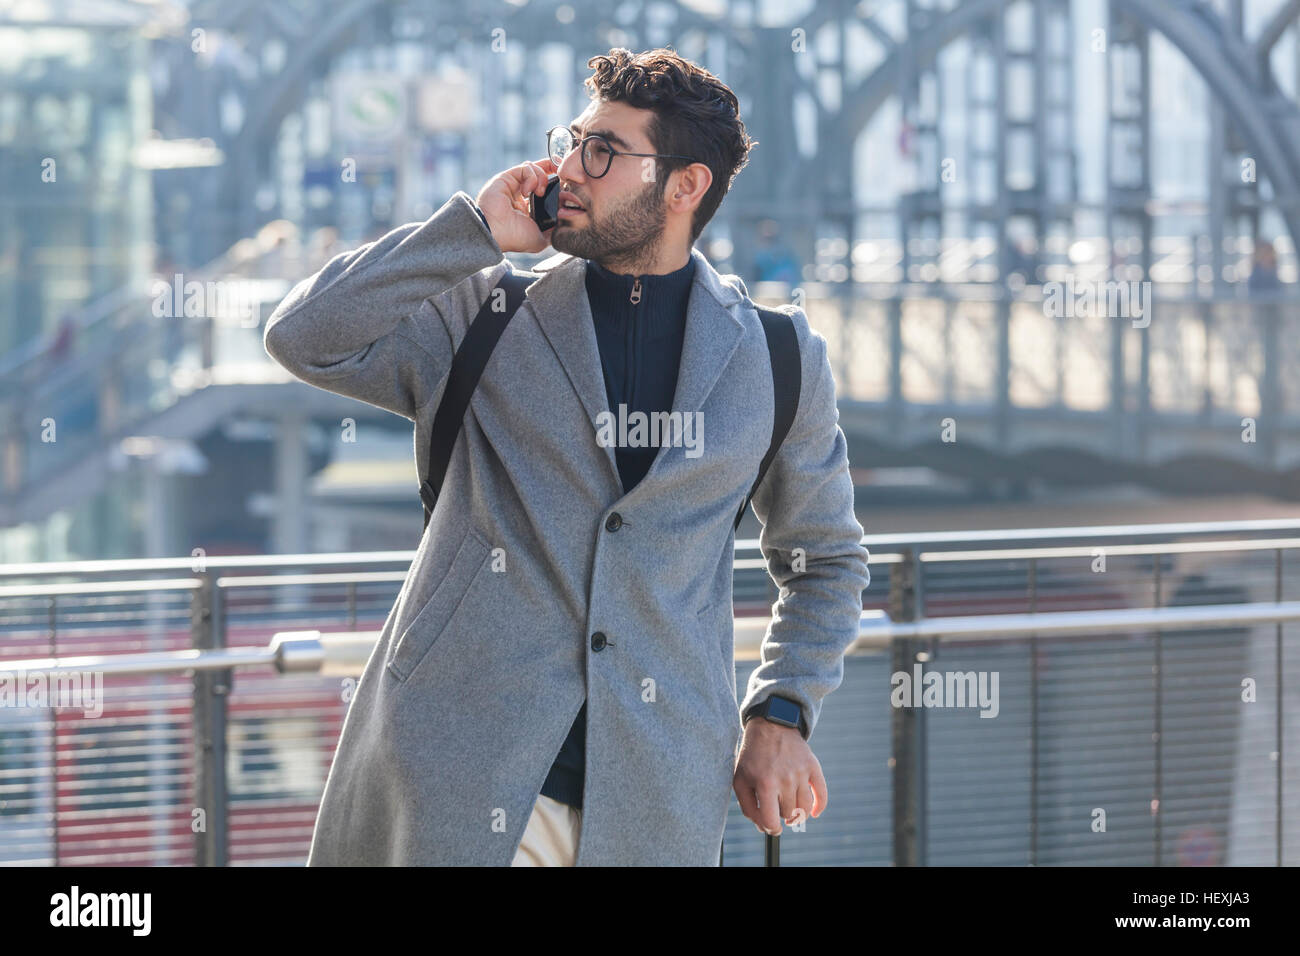 Businessman with baggage on the phone at train station Stock Photo